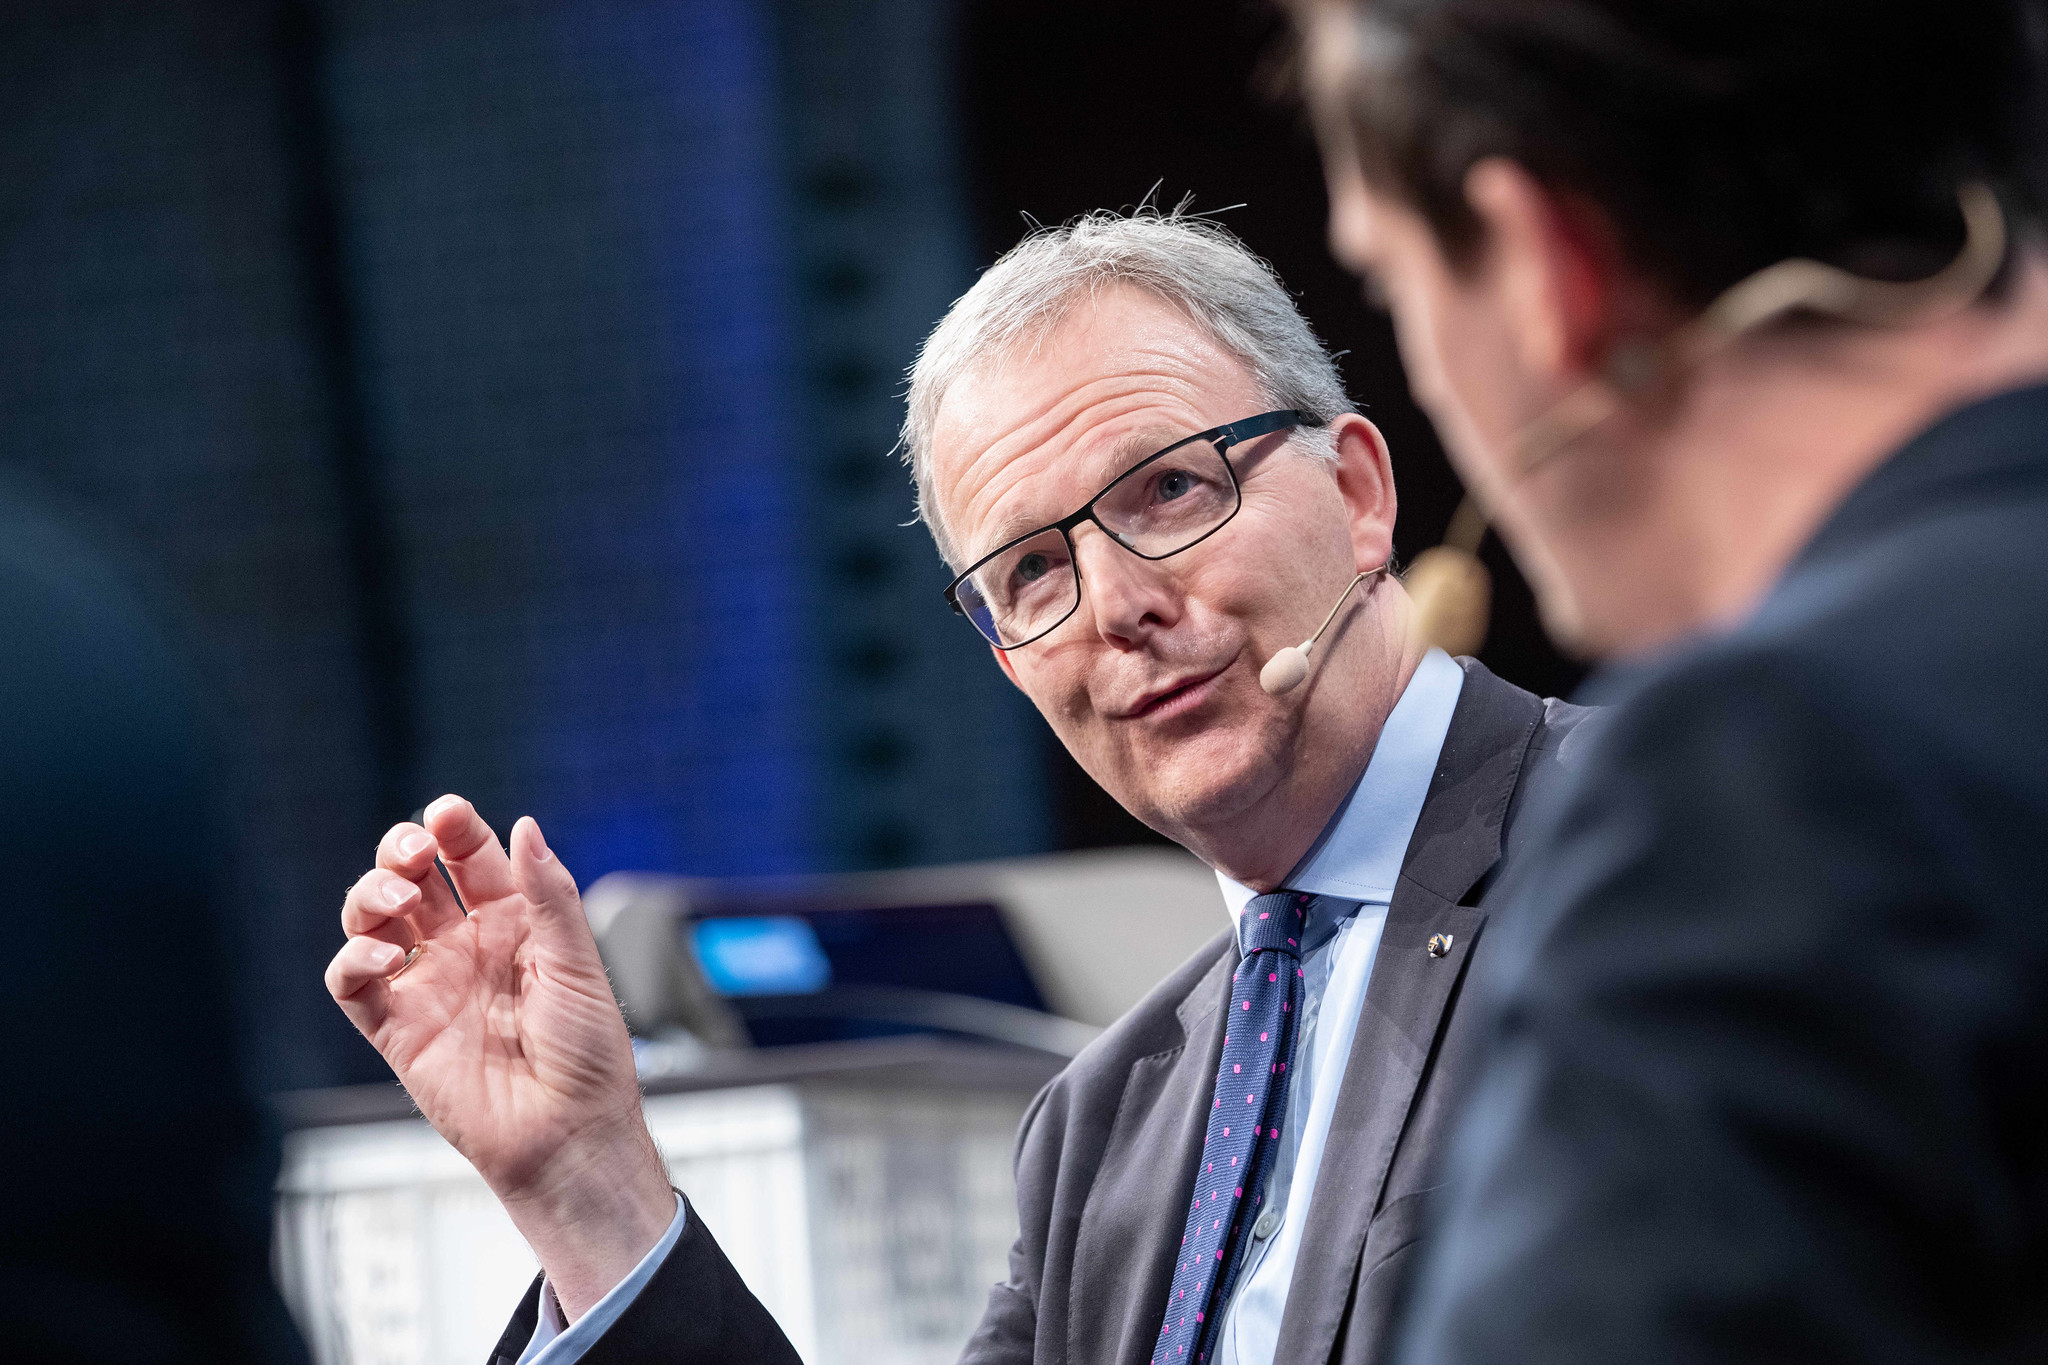 Axel Voss: The AI Act is an important step forward with many question marks